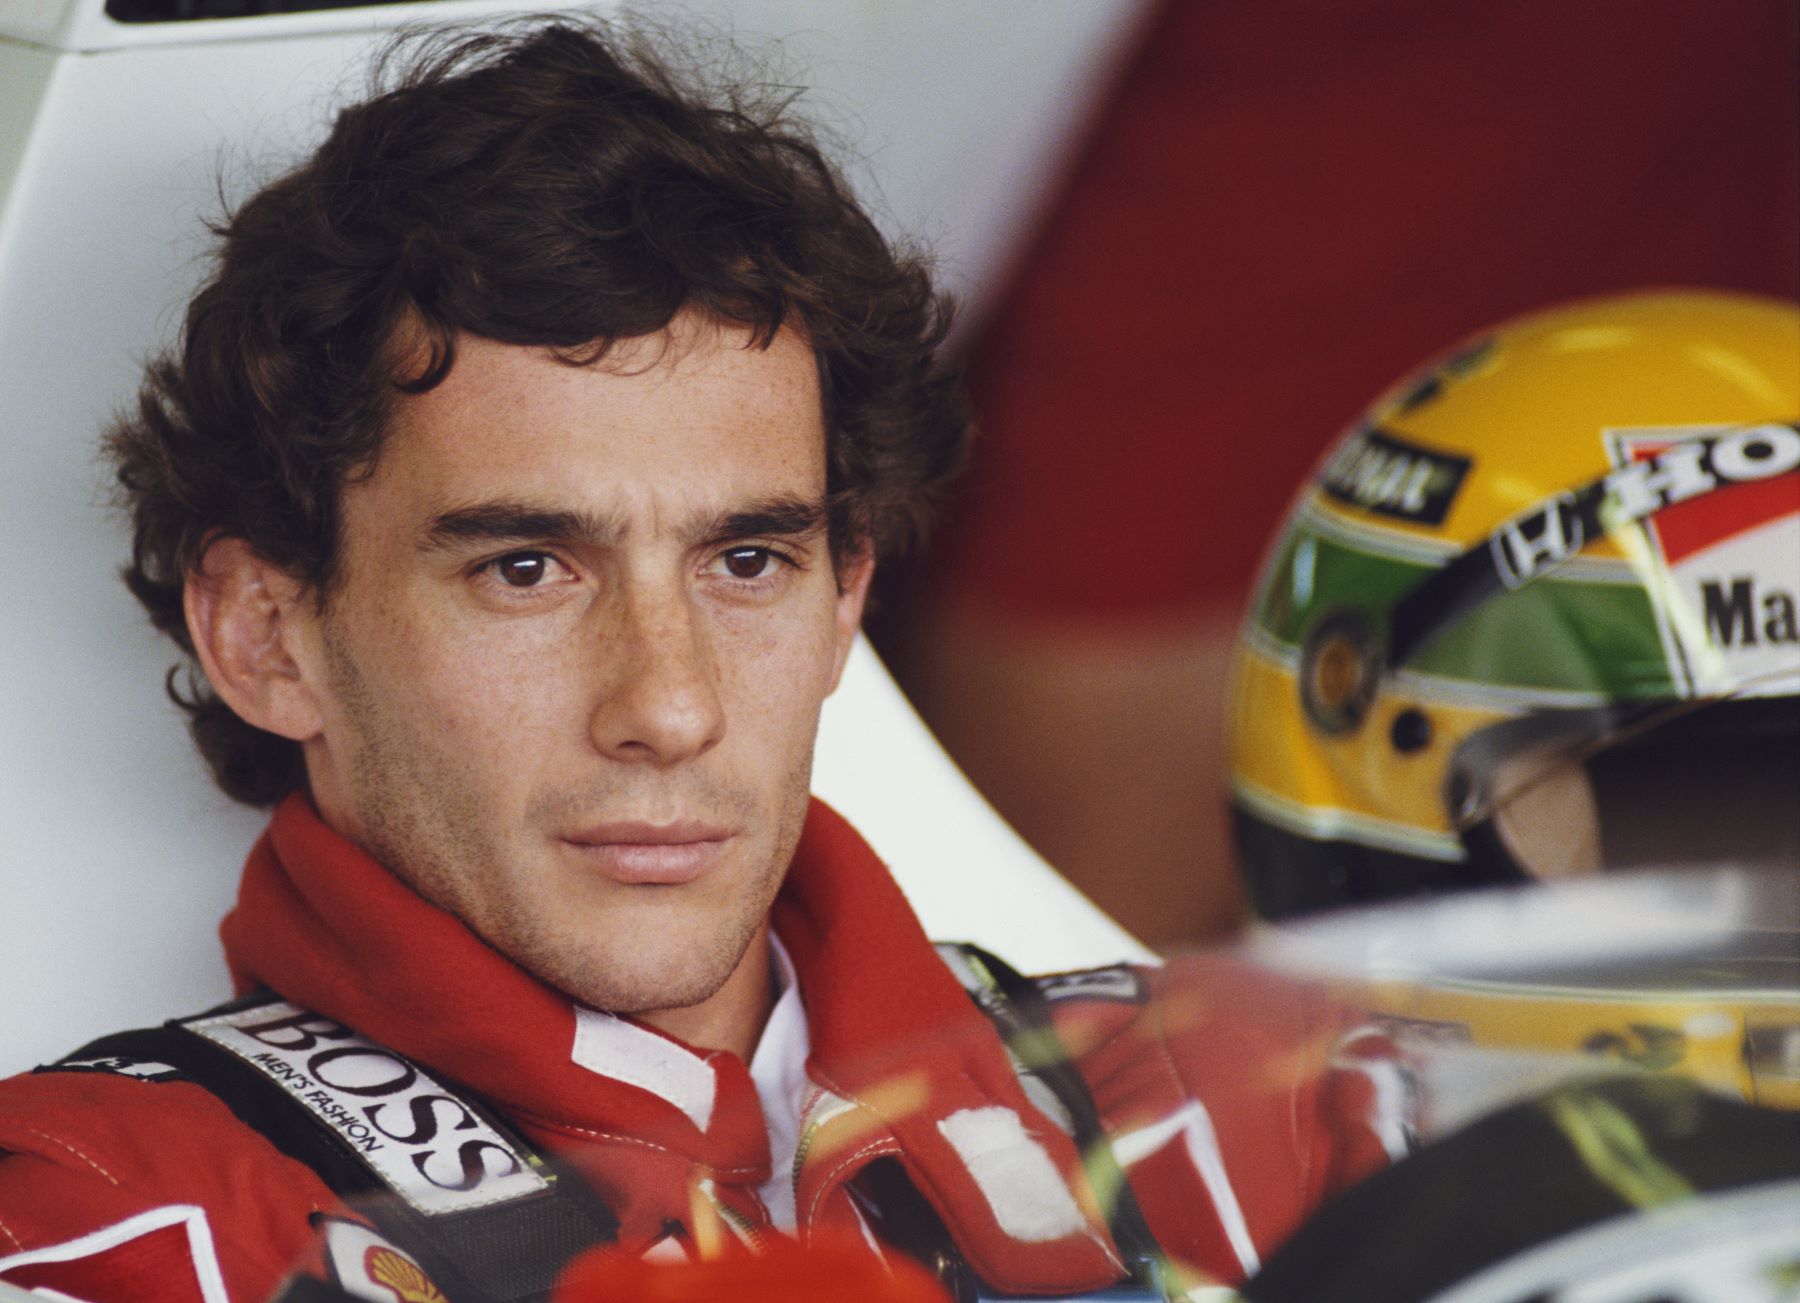 Motorsports racer Ayrton Senna of Brazil at practice for the Hungarian Gran Prix in Budapest